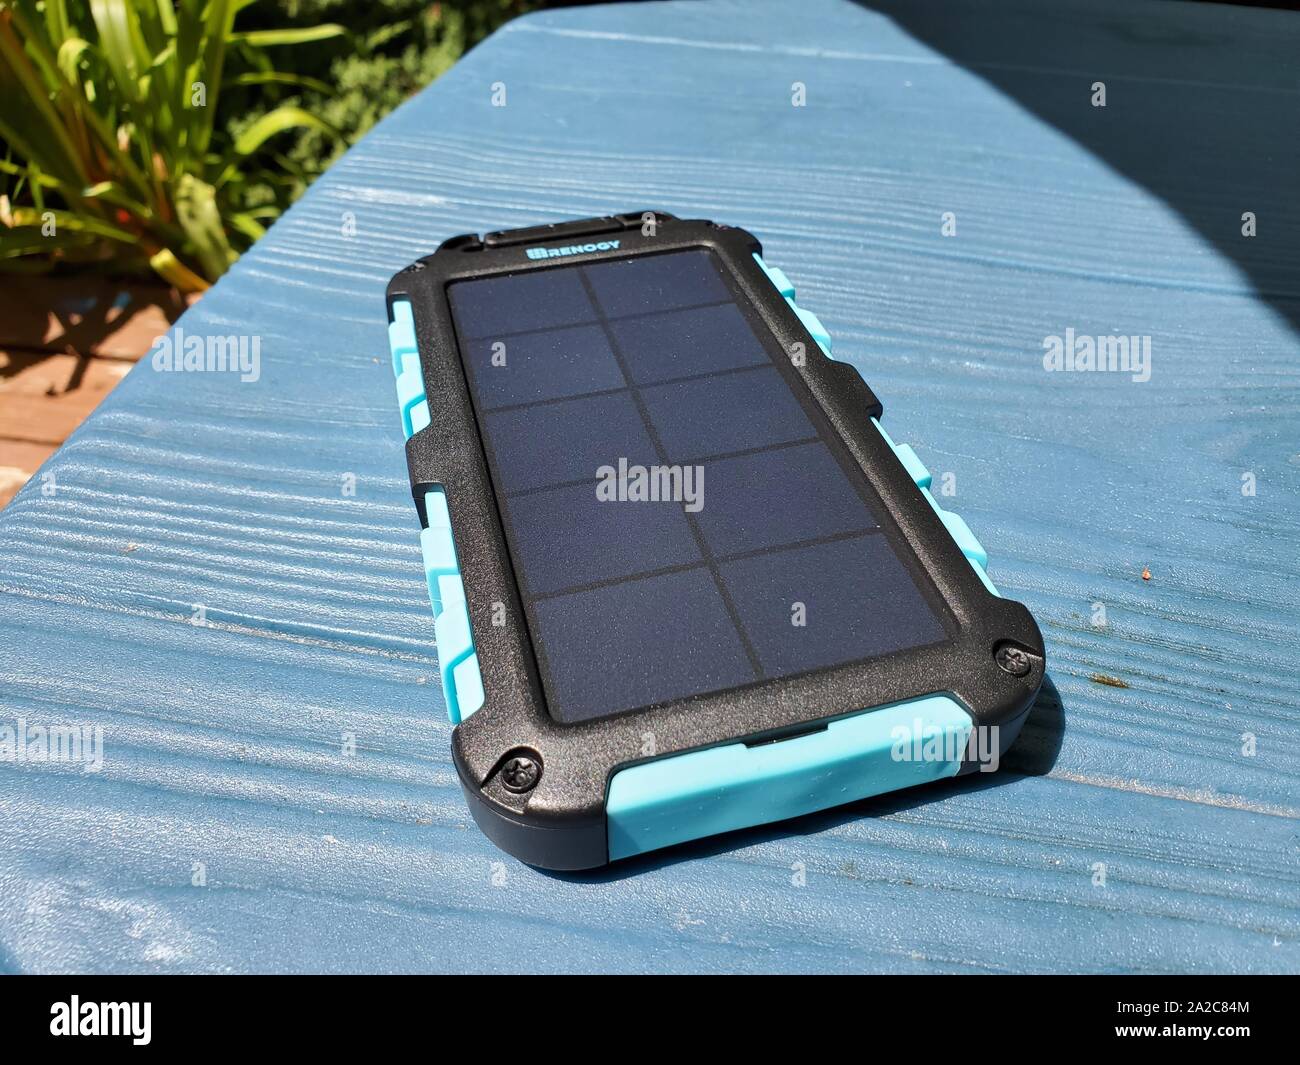 Renogy EPower solar-powered emergency cellular phone charger, designed for use during camping or power outages, charging in sunlight on a blue surface outdoors, San Ramon, California, August 2, 2019. () Stock Photo